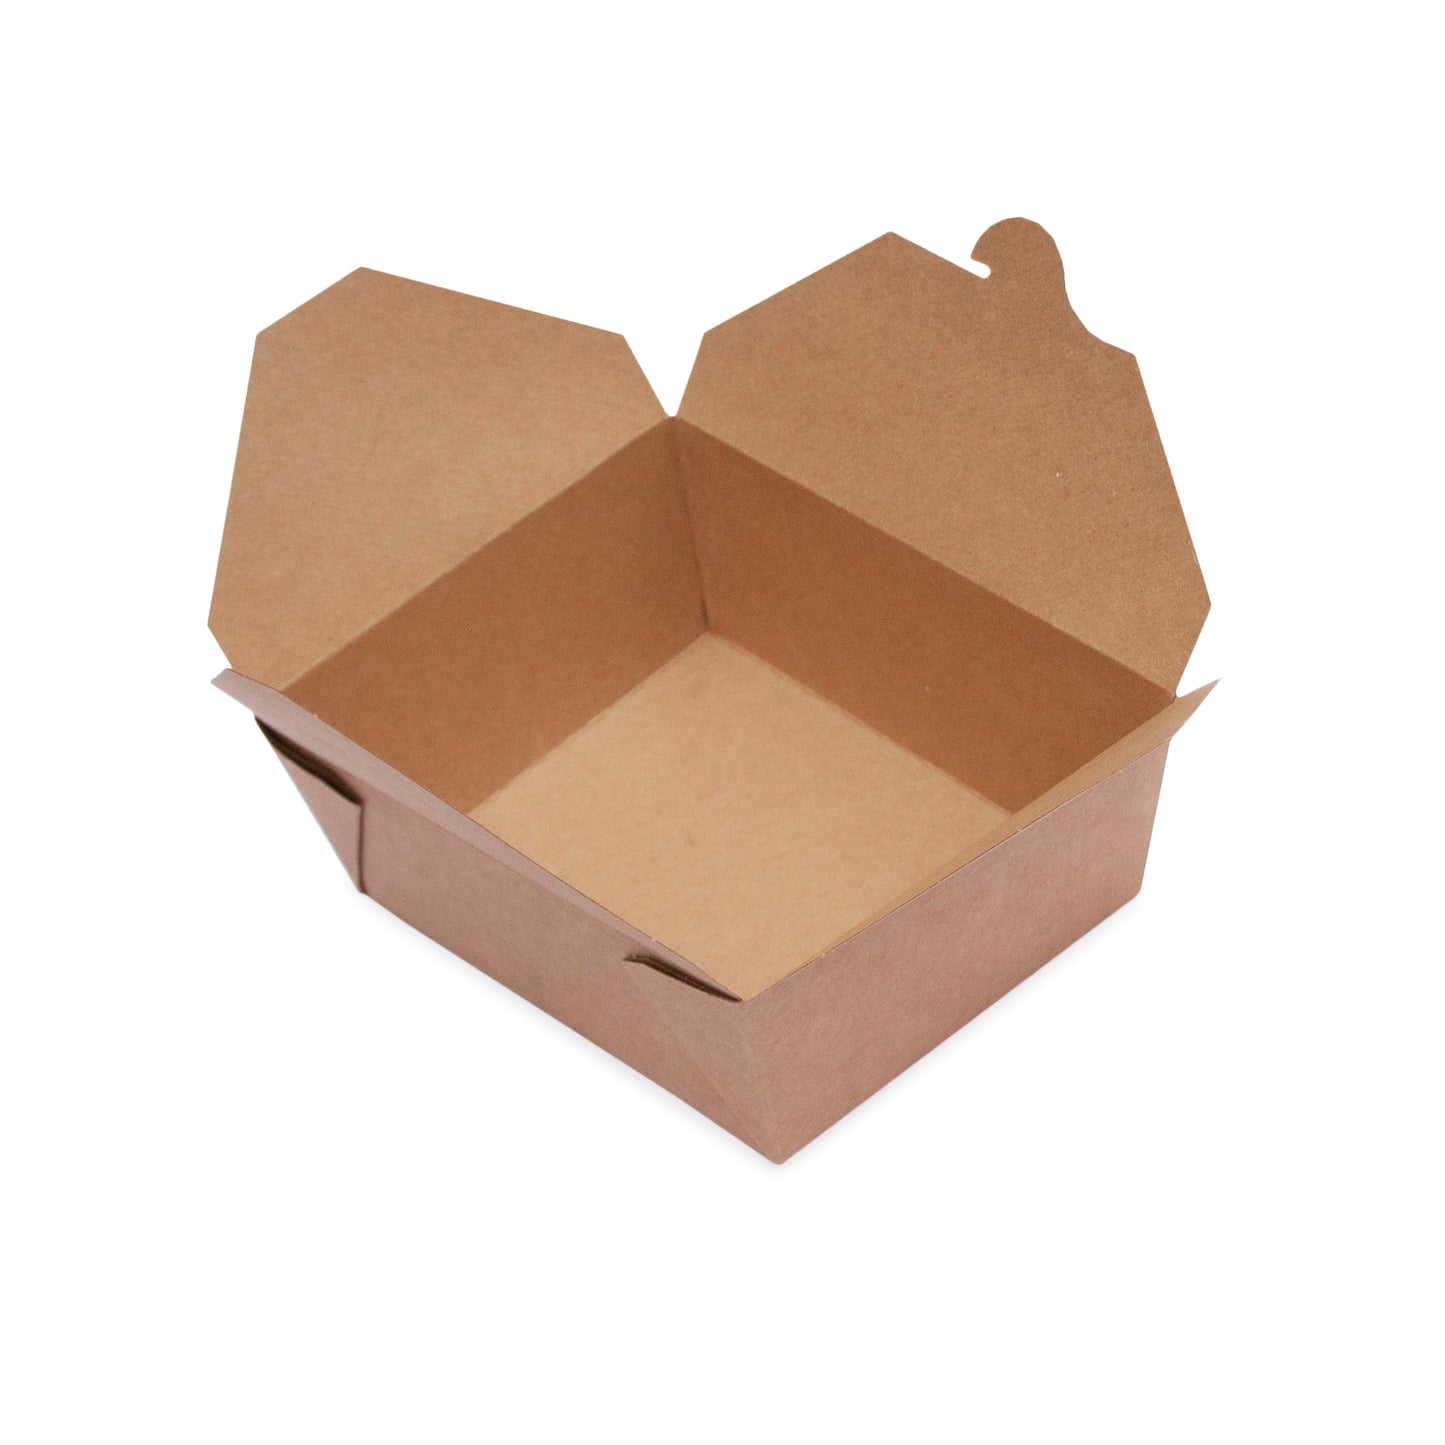 Leakproof food container No.4 kraft food-to-go carton 180 units,  2500ml (19.5 x 14 x 9cm)